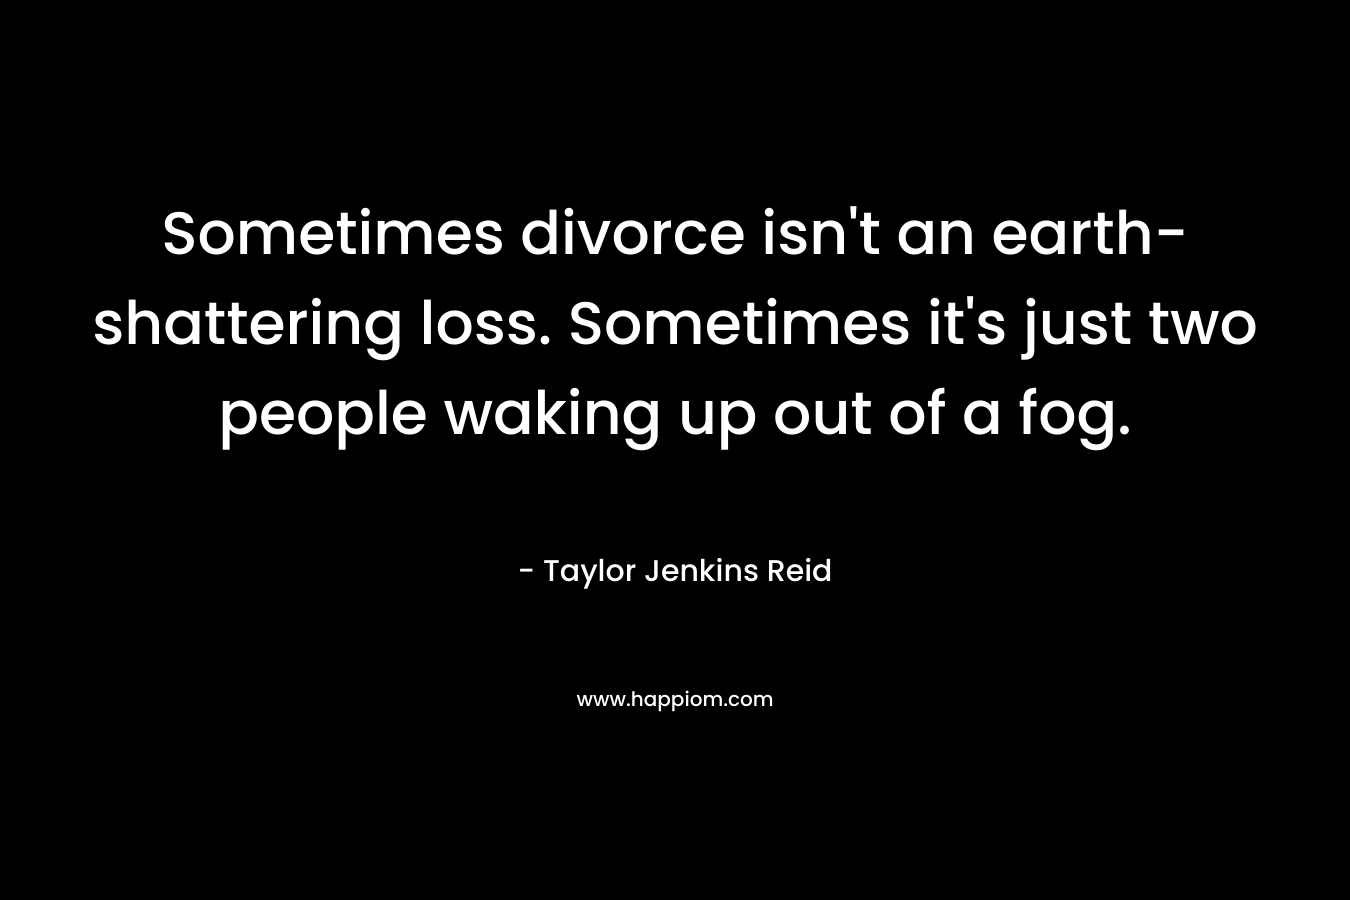 Sometimes divorce isn’t an earth-shattering loss. Sometimes it’s just two people waking up out of a fog. – Taylor Jenkins Reid